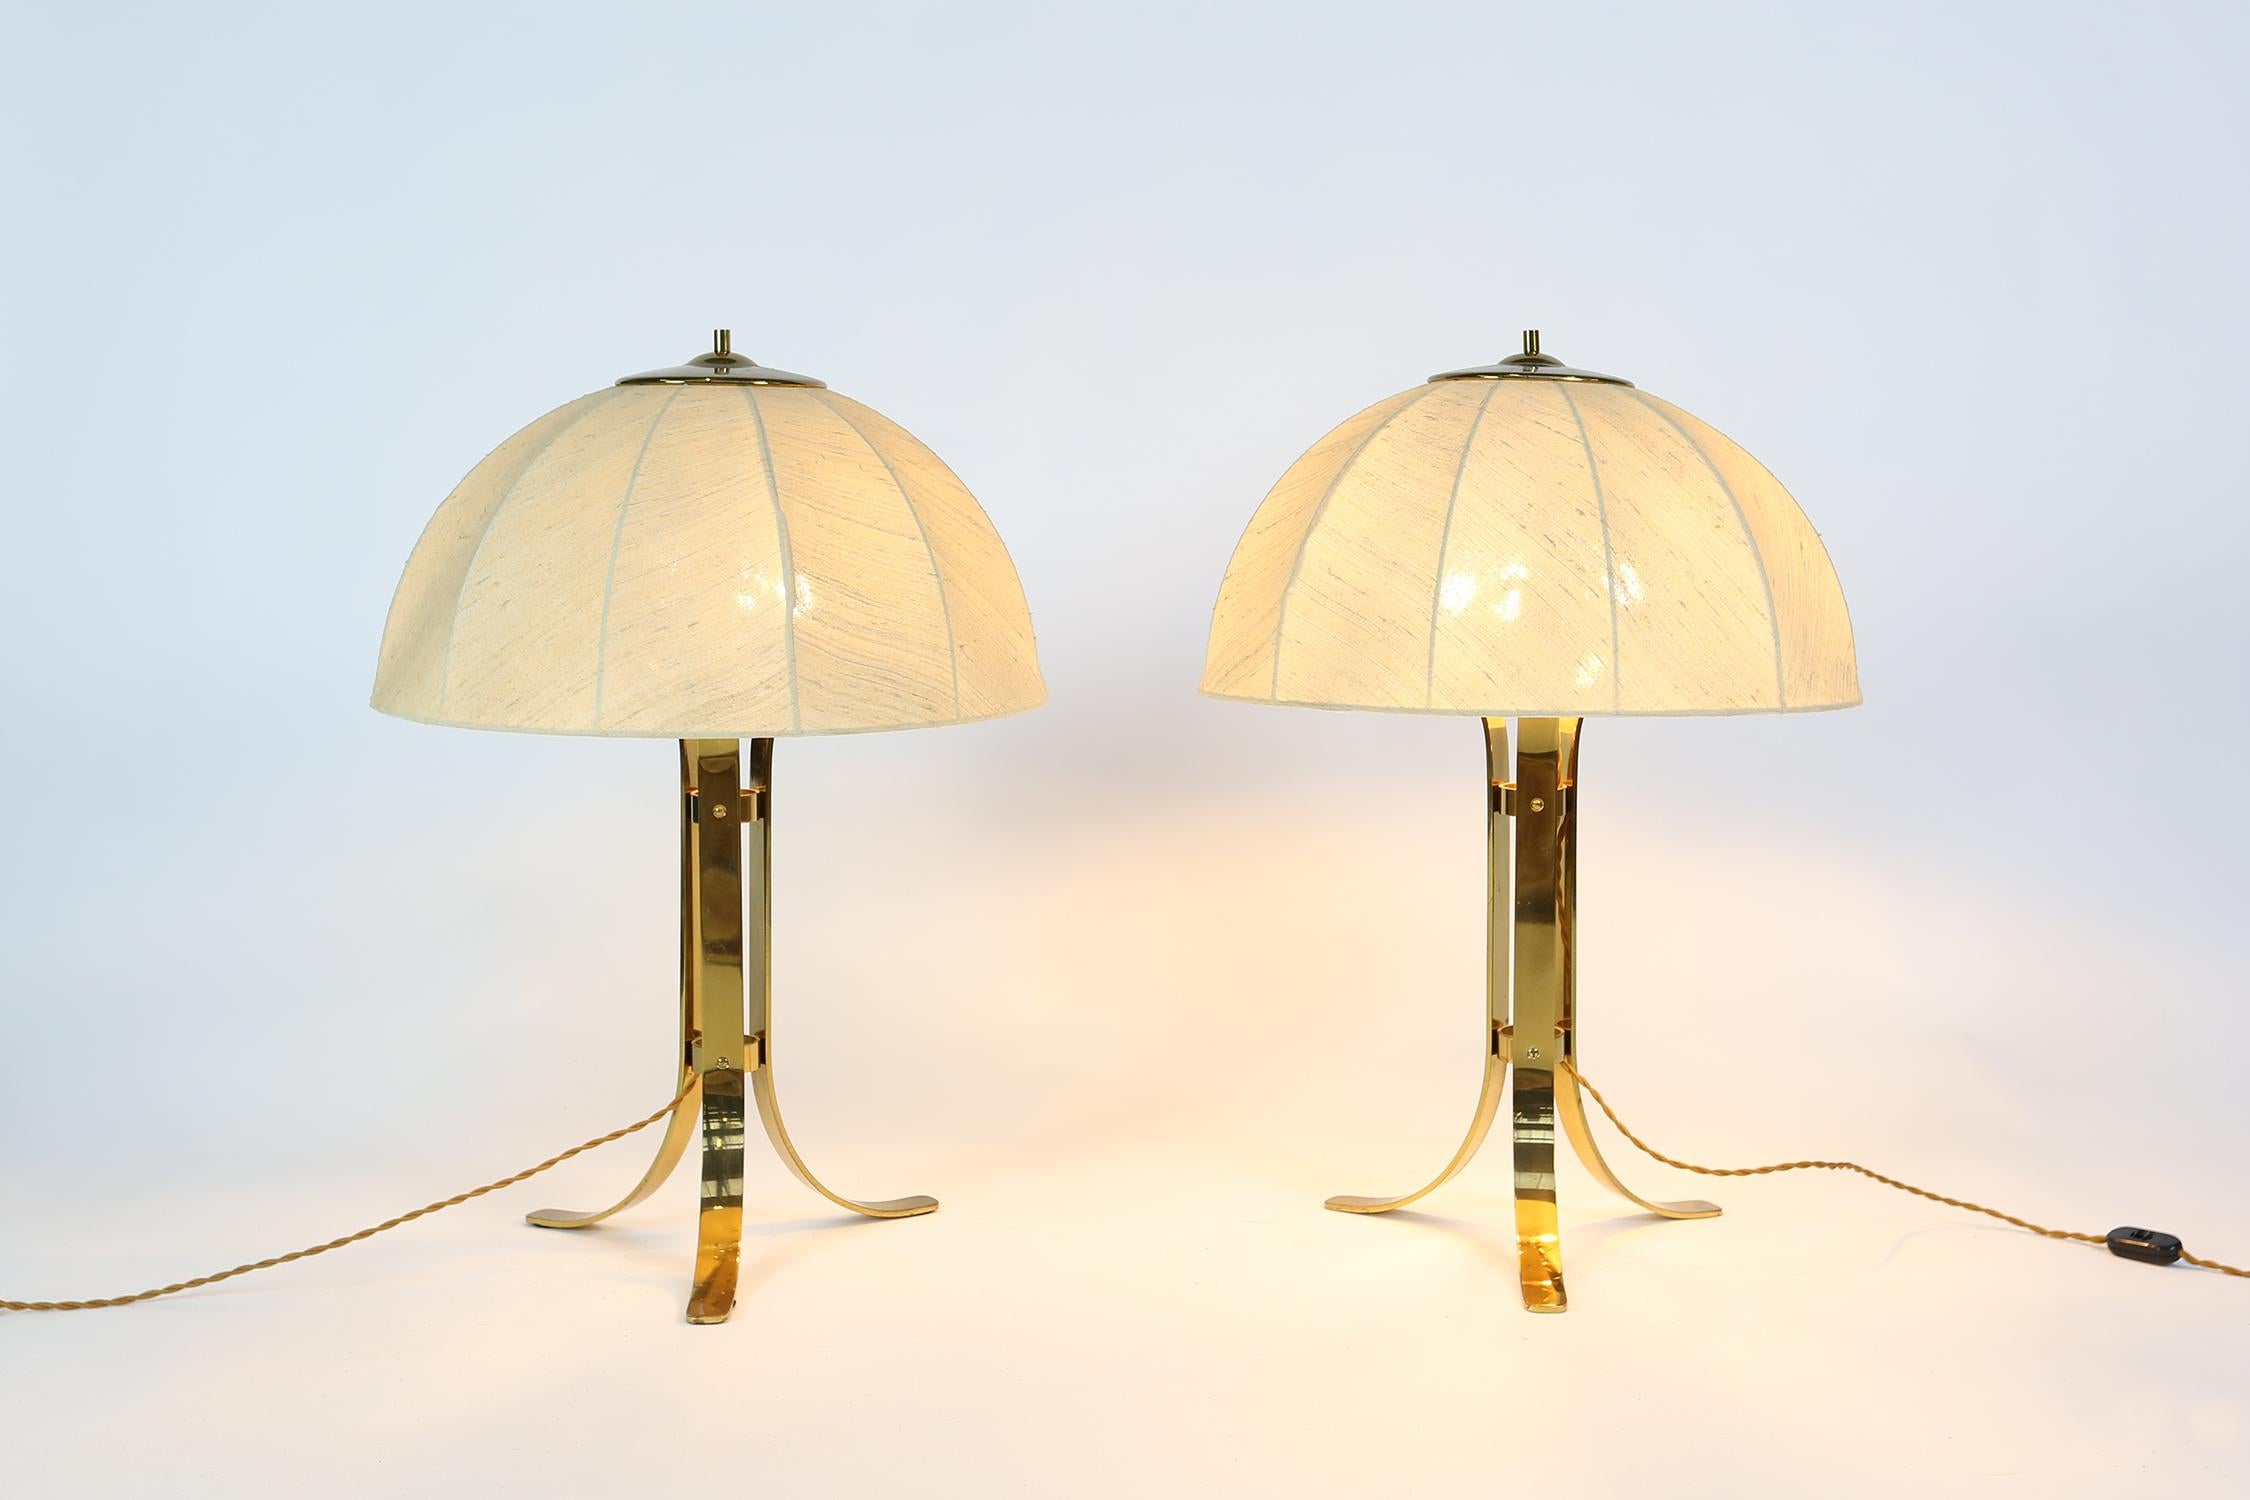 A wonderful pair of Italian table lamps, circa 1960. Beautifully aged silk lampshades on a brass base, compliment the newly re-wired cording.
Each lamp has 3 lightbulbs.